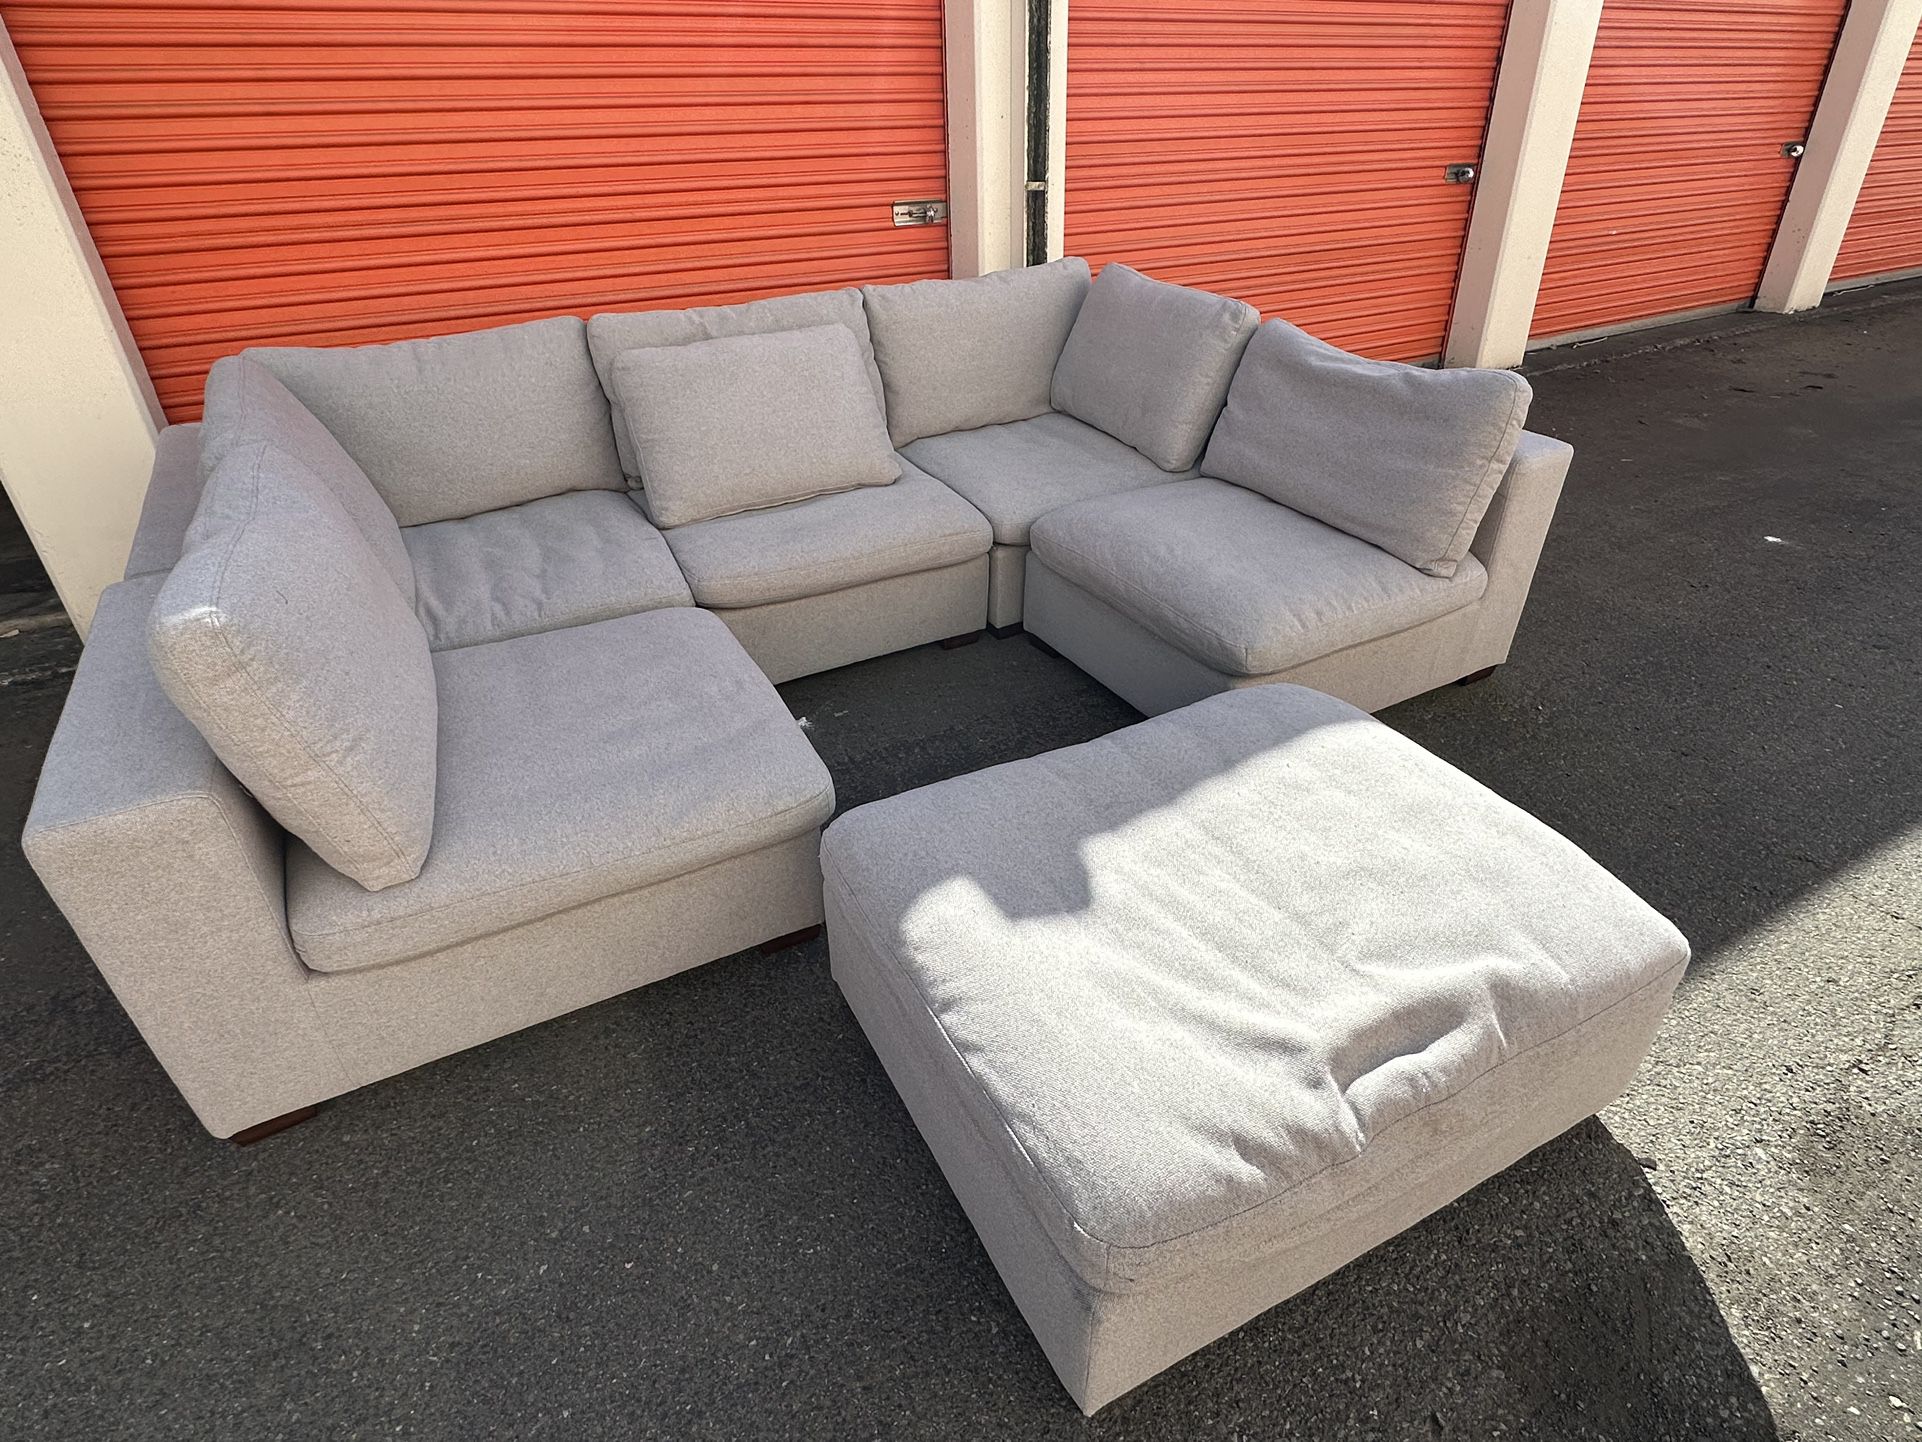 Thomasville Modular Sectional Sofa Couch - FREE DELIVERY 🚚 